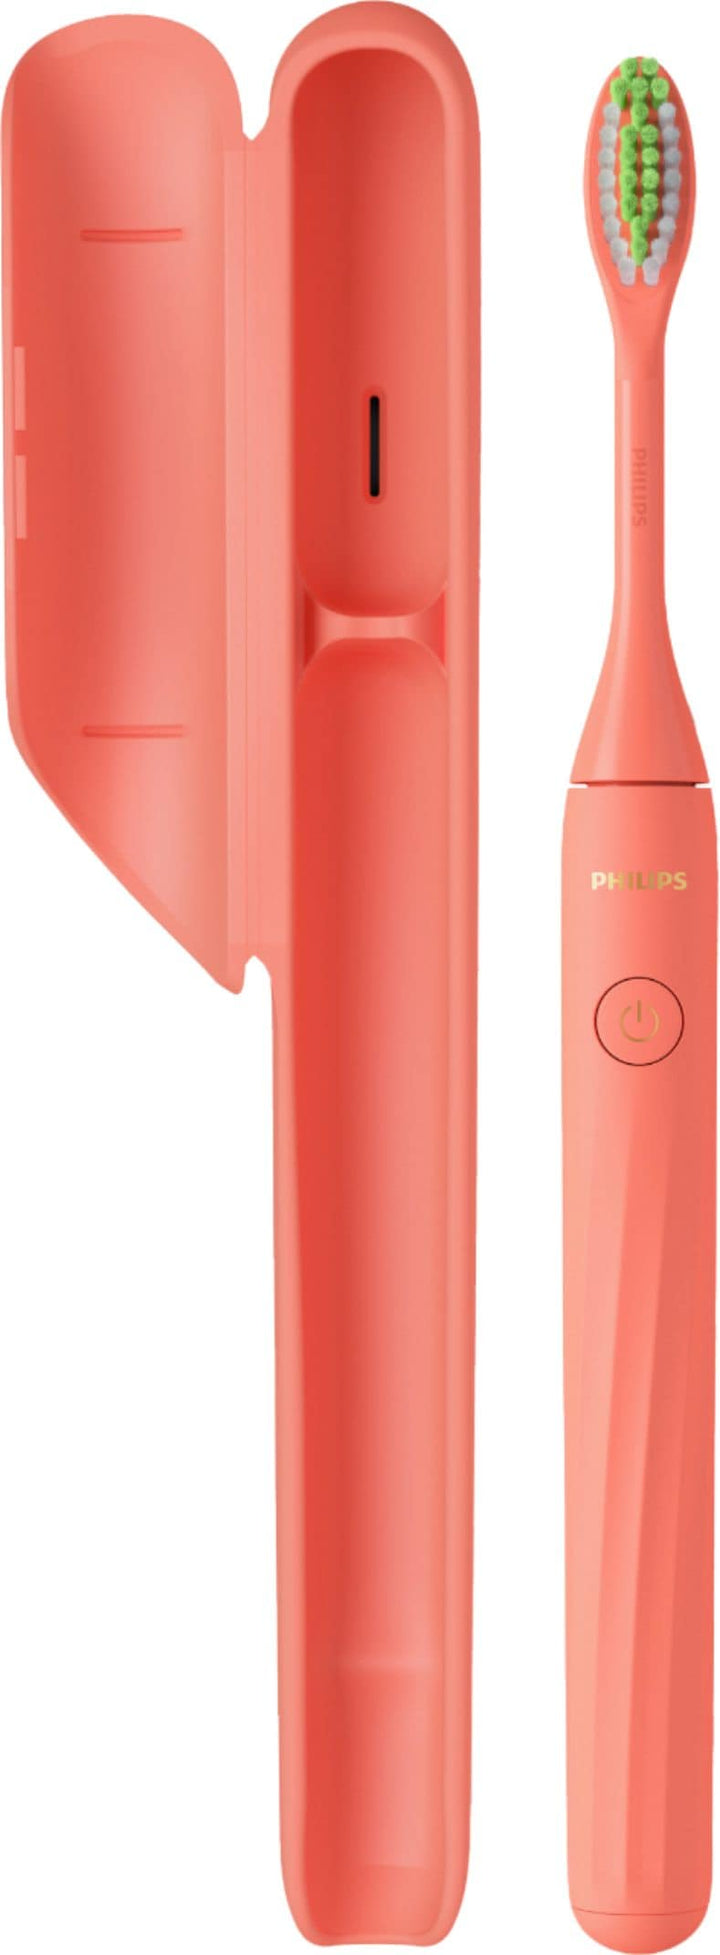 Philips Sonicare - Philips One by Sonicare Battery Toothbrush - Miami Coral_1